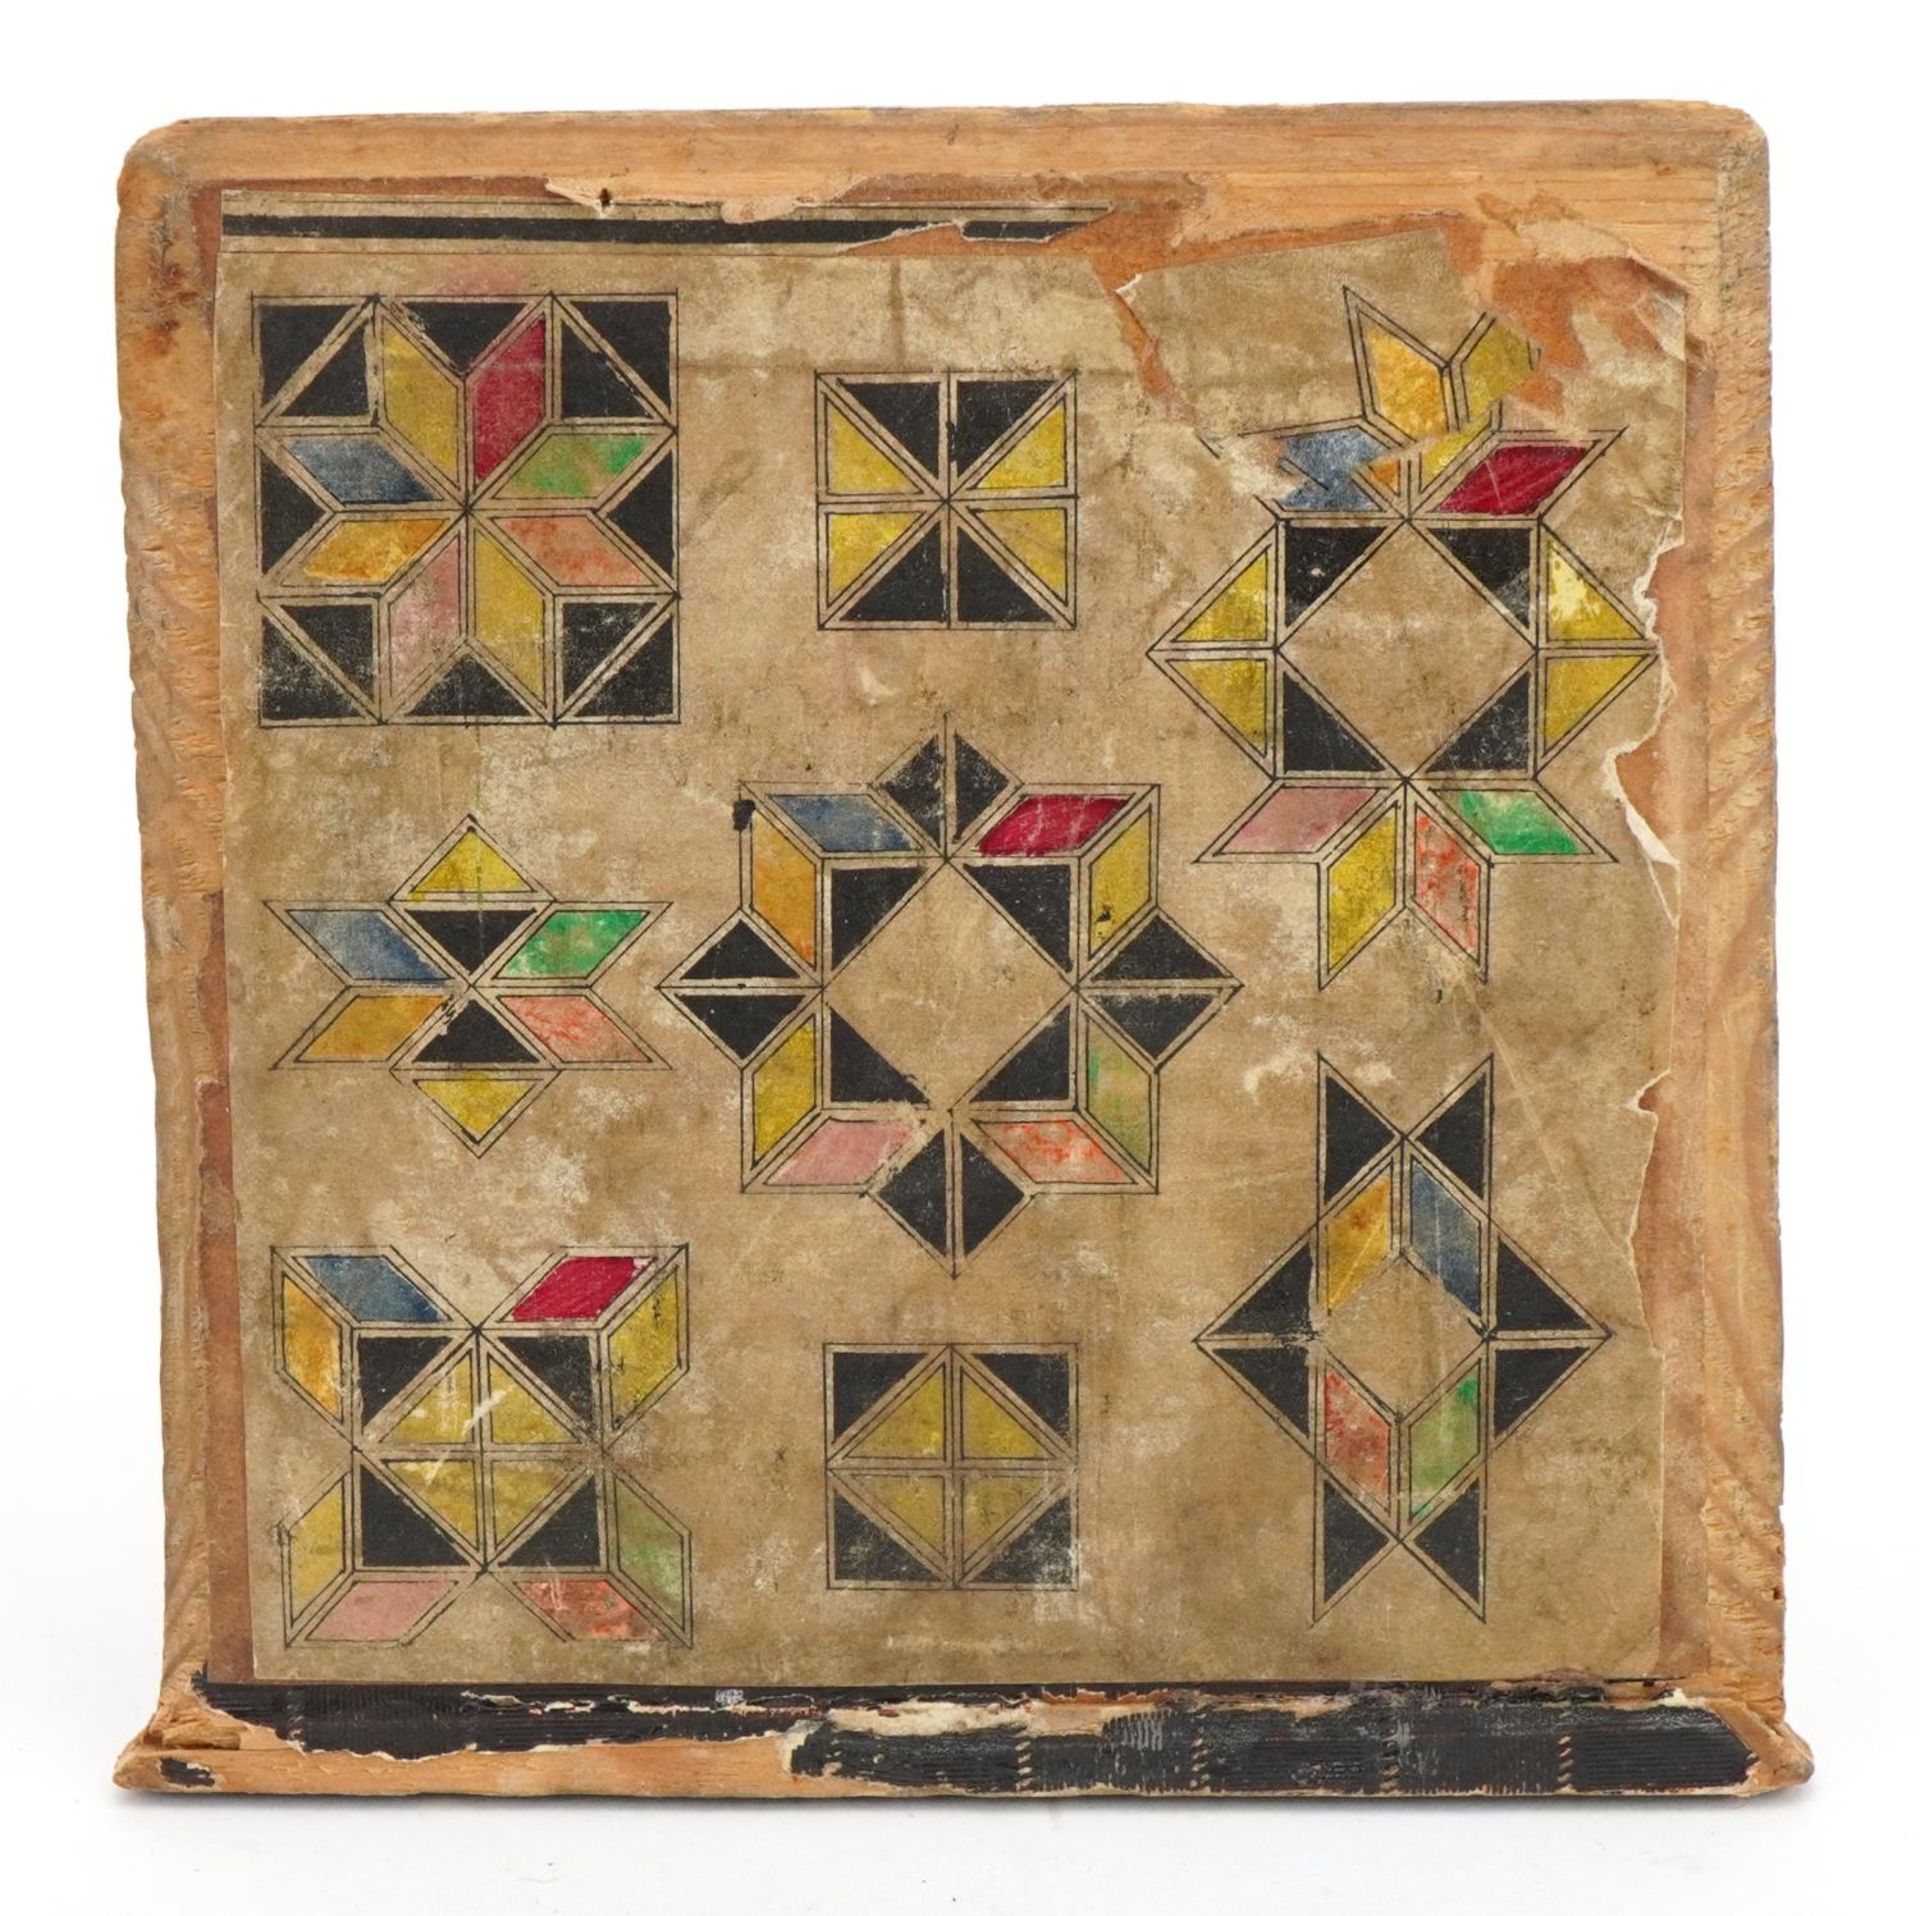 19th century stellated Drawing in Colours puzzle with wooden box having a slide lid, 11.5cm x 11.5cm - Image 2 of 3